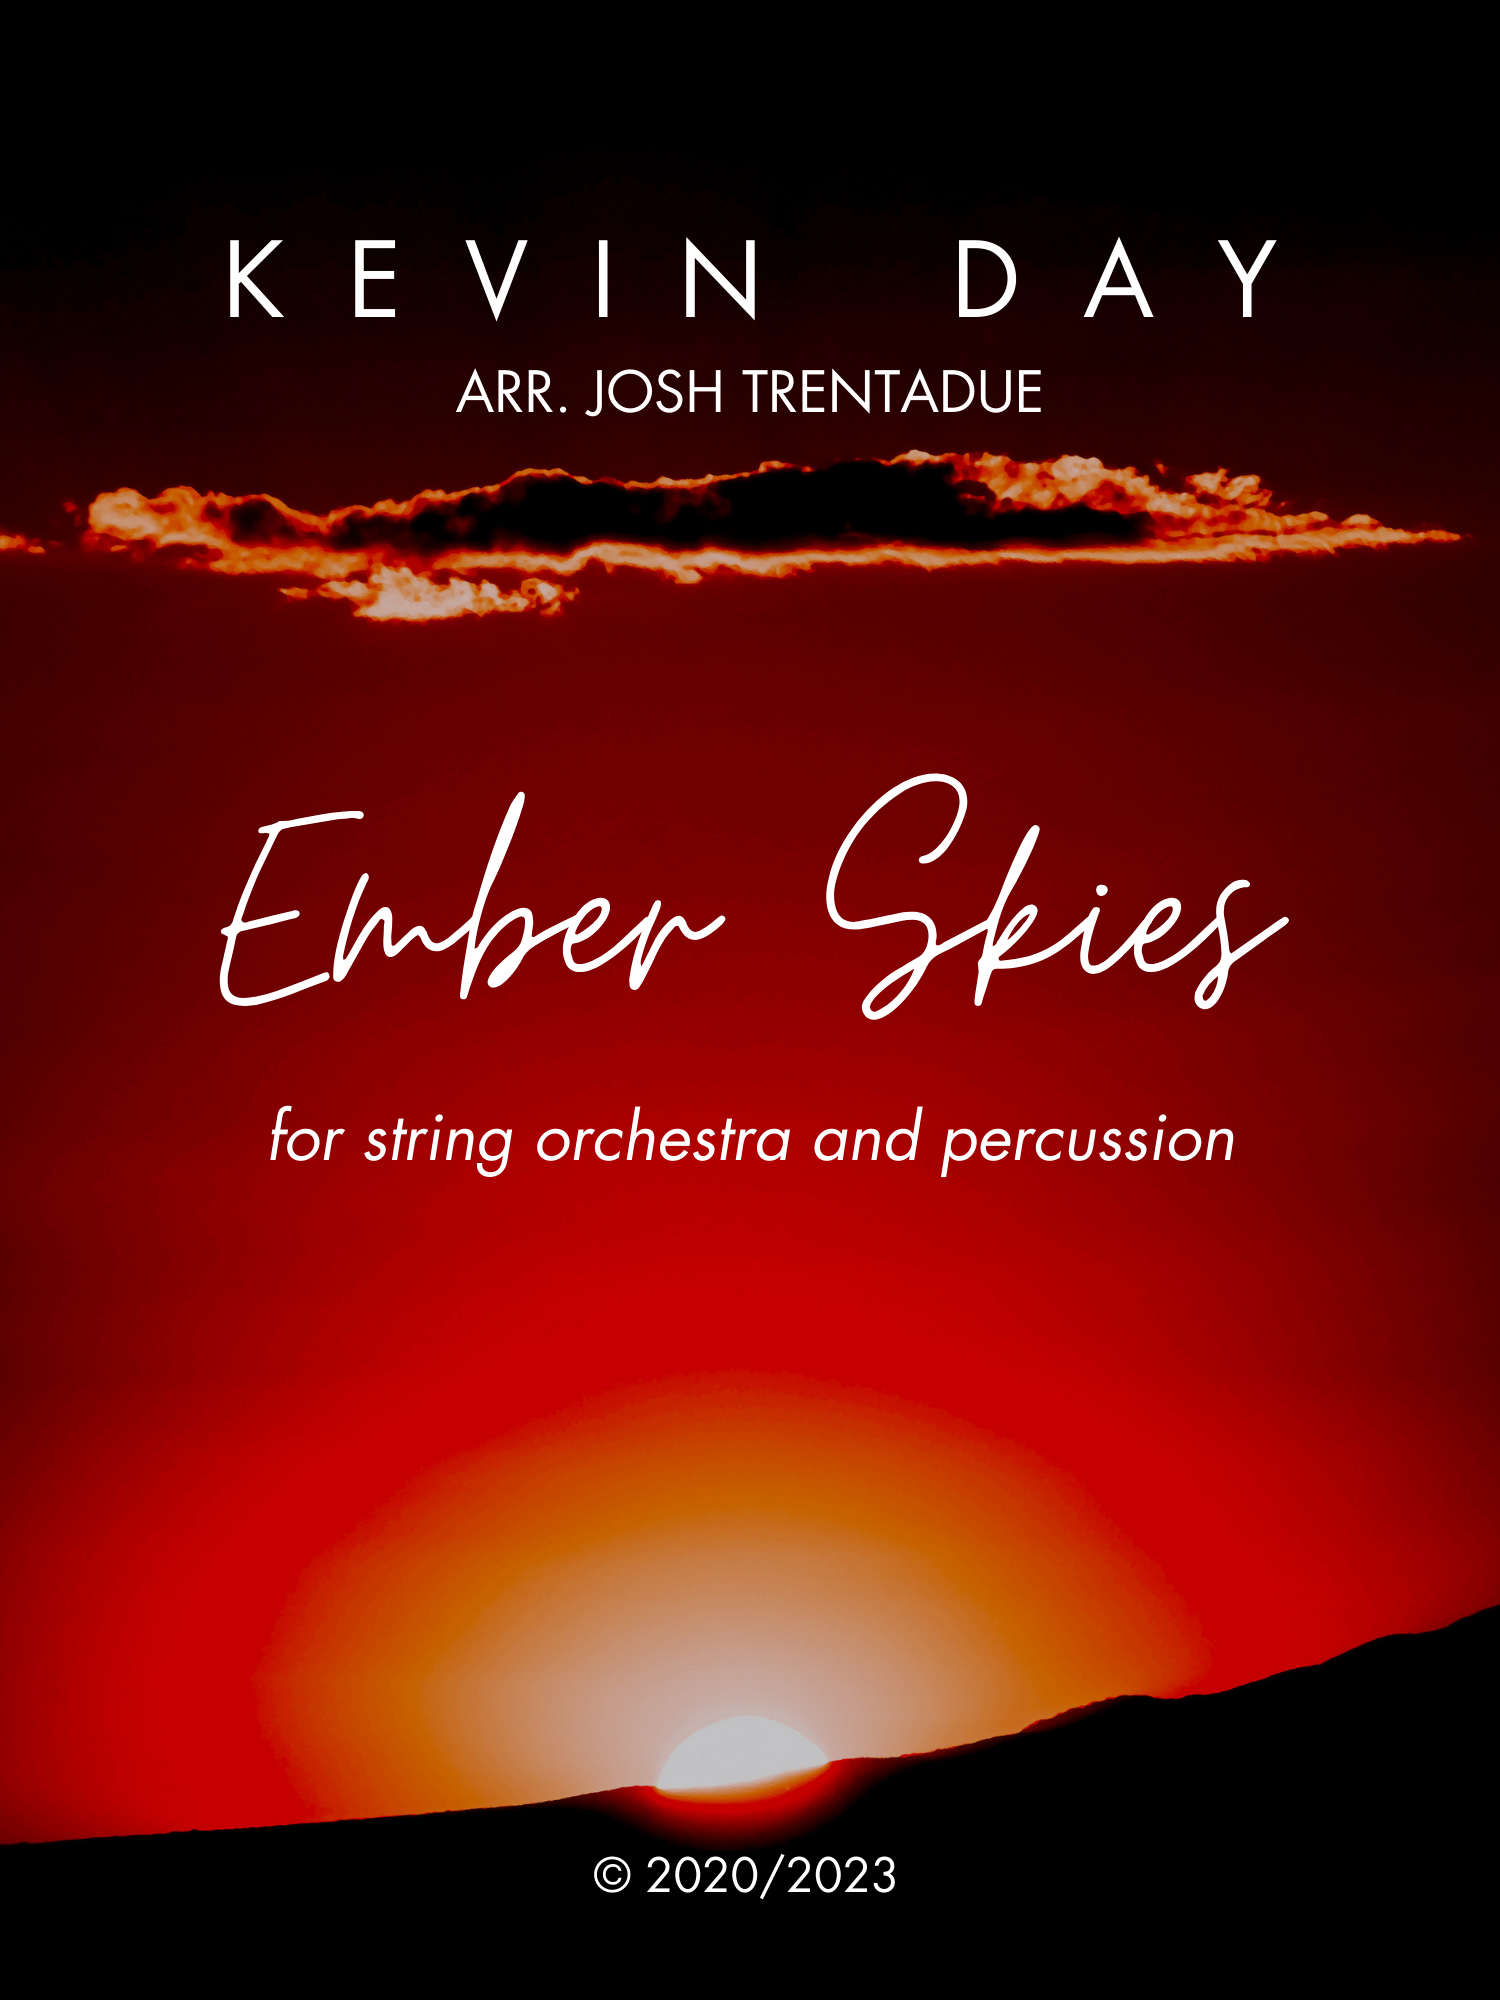 Ember Skies (String Orchestra Version) by Kevin Day arr. Josh Trentadue